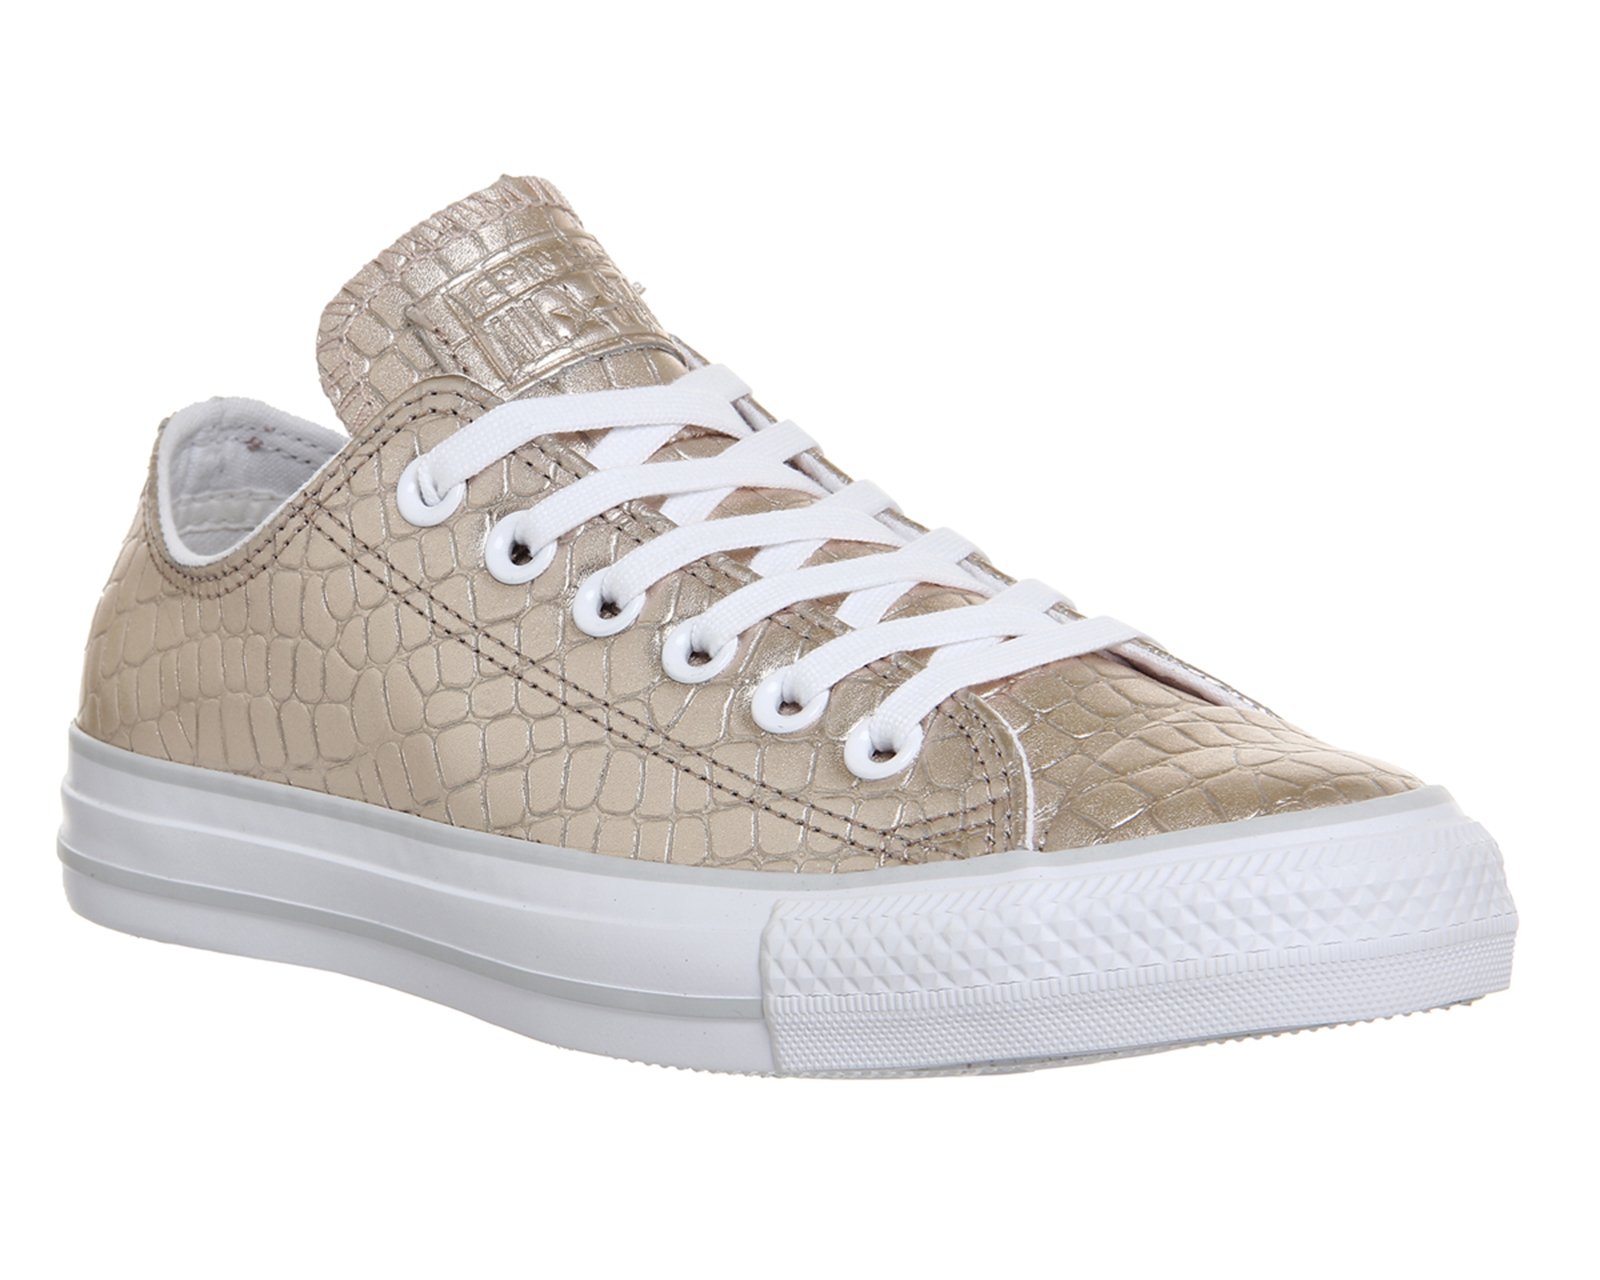 converse allstar low leather rose gold,Quality assurance,protein-burger.com